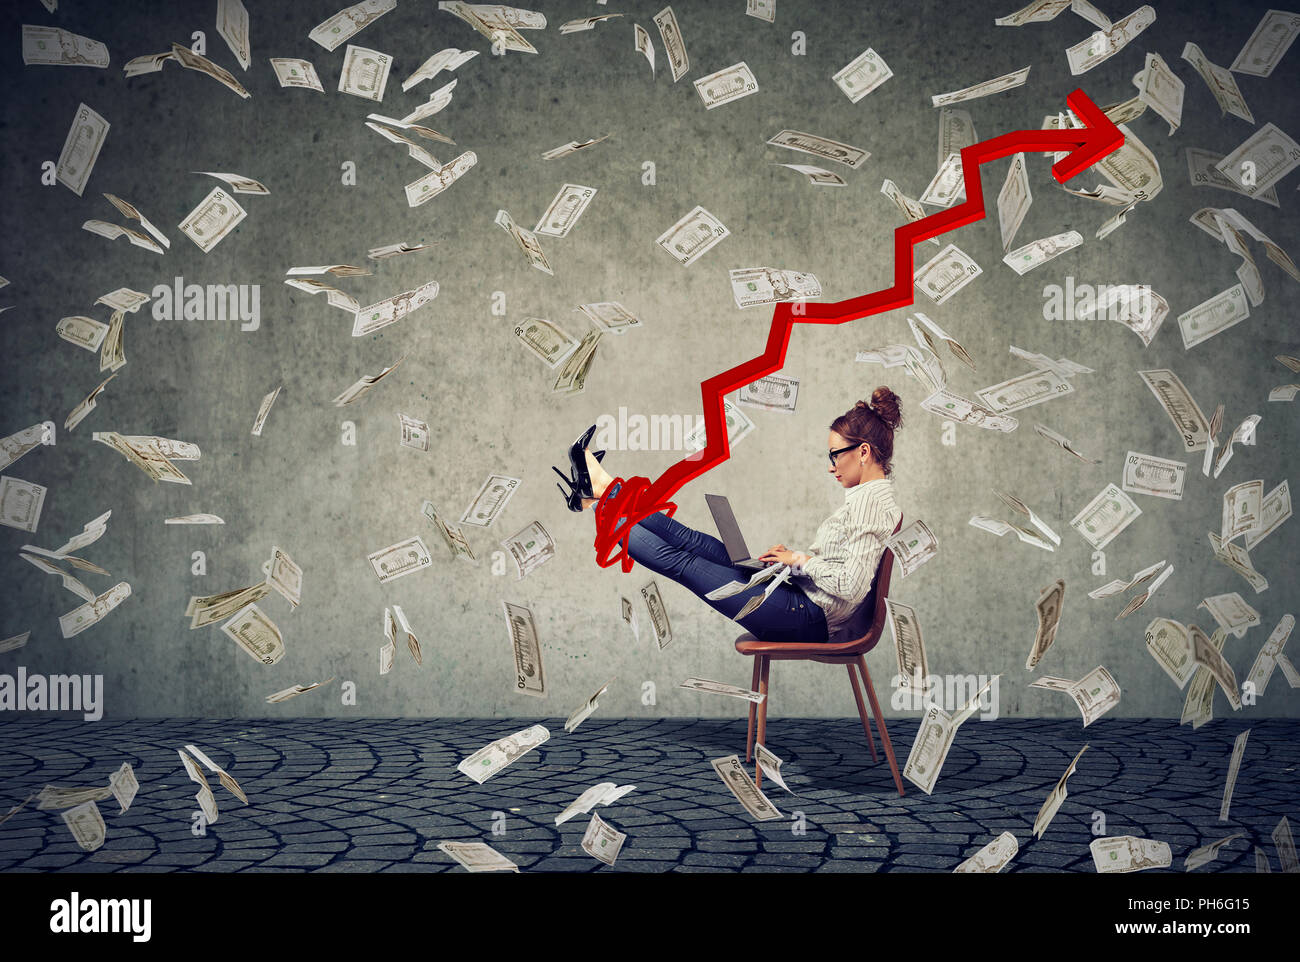 Concept side view shot of businesswoman using laptop on chair among flying money bills and growing red arrow on gray background Stock Photo